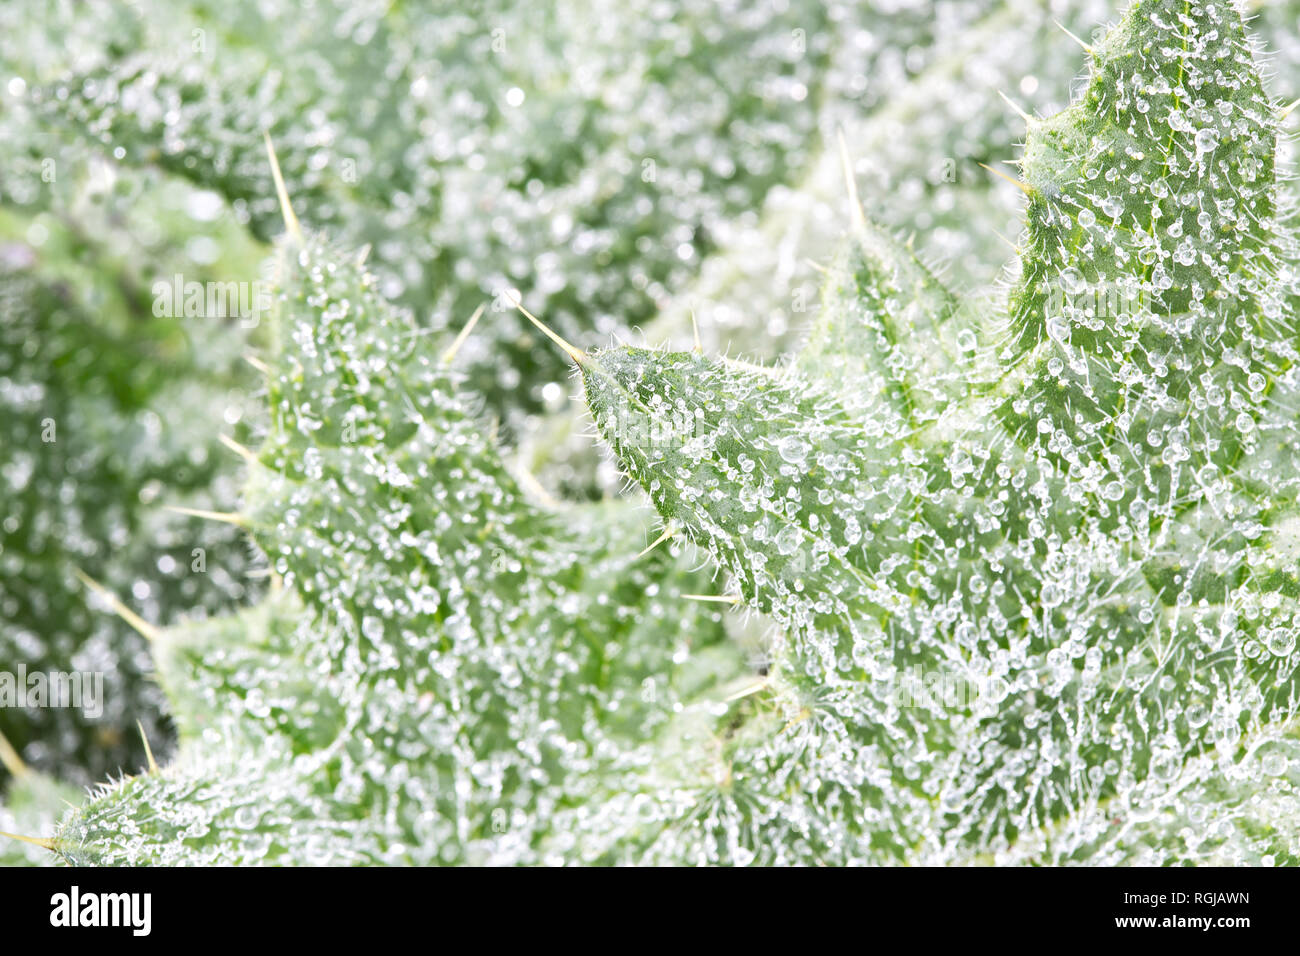 Nature Background. Background of dew drops on bright green herbage. Wallpaper Stock Photo